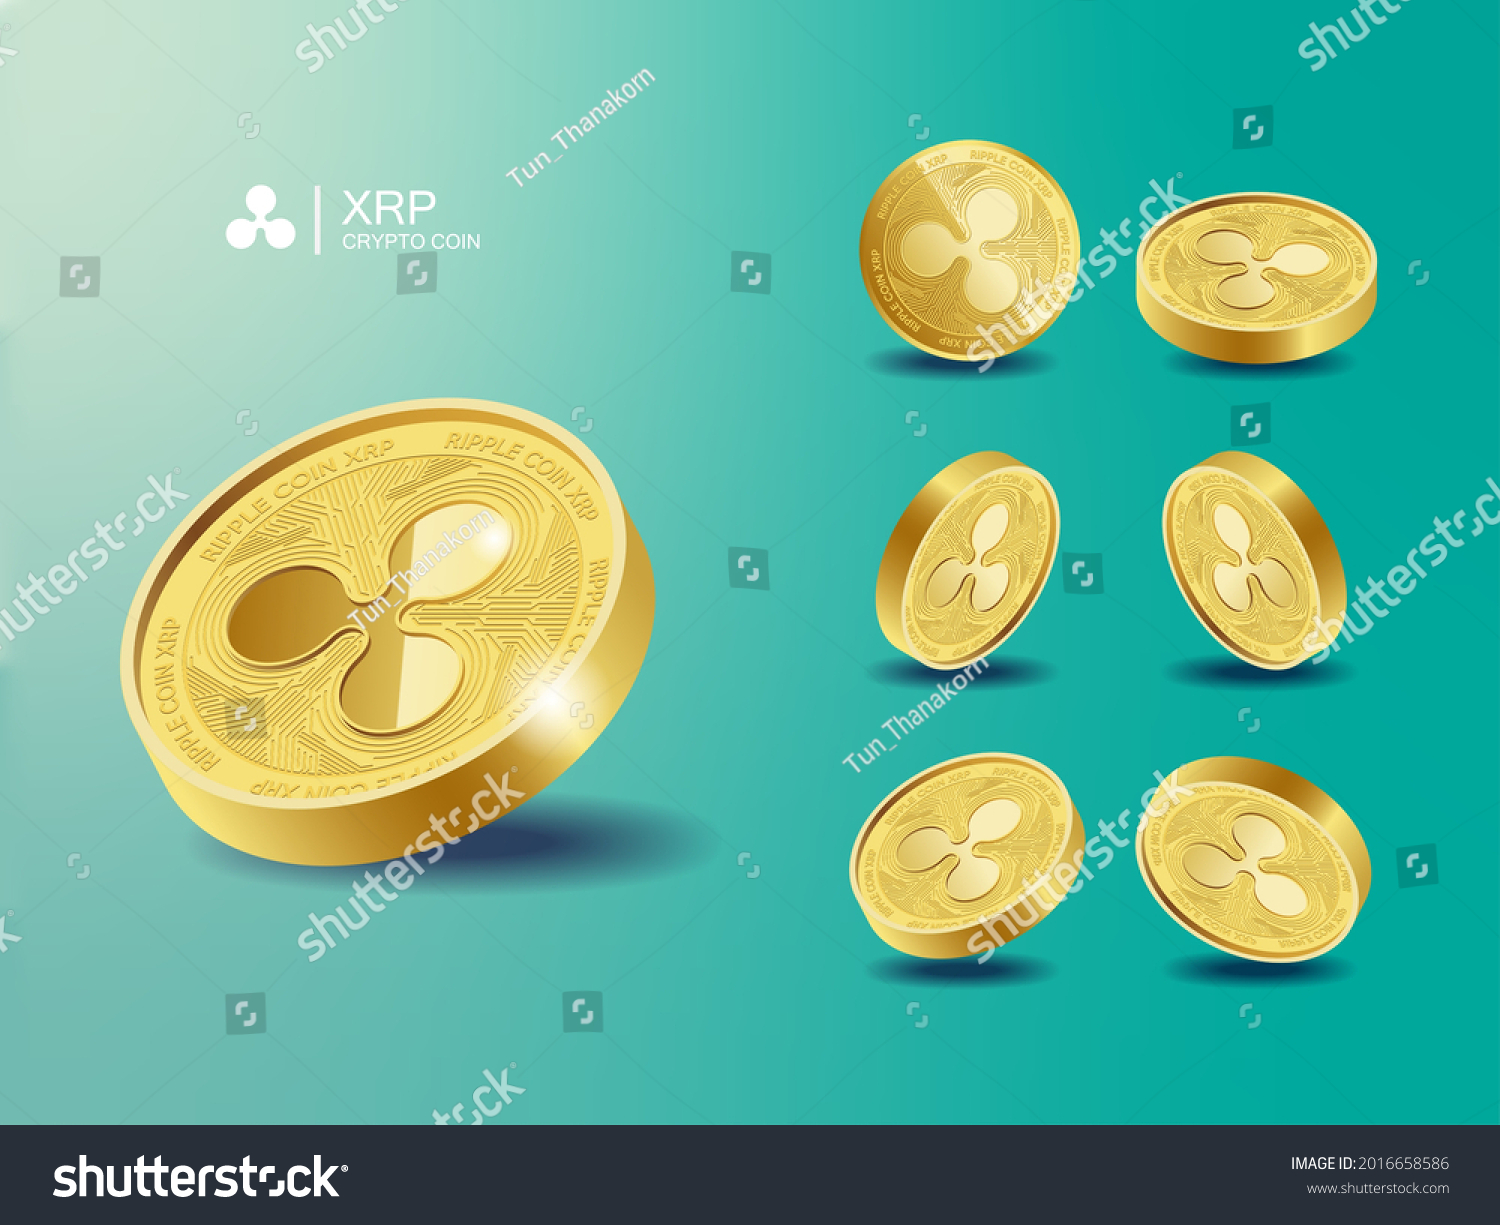 SVG of Ripple XRP Cryptocurrency Coins. Perspective Illustration about Crypto Coins. svg